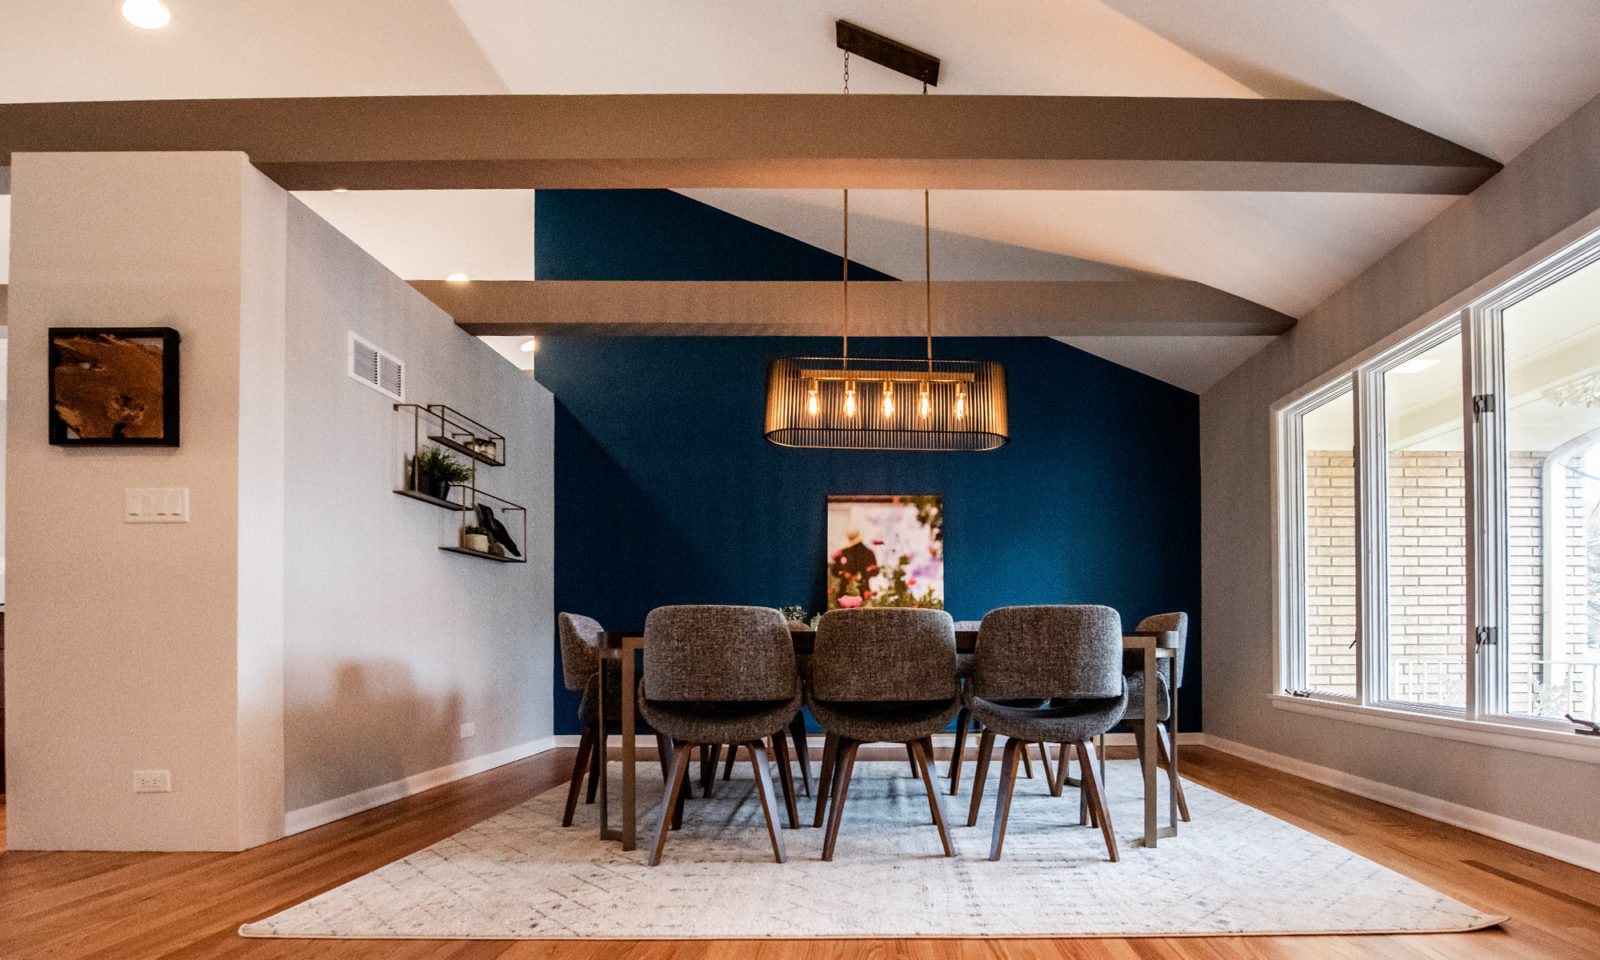 LivCo dining room design remodel grey exposed beams blue feature wall modern light fixture